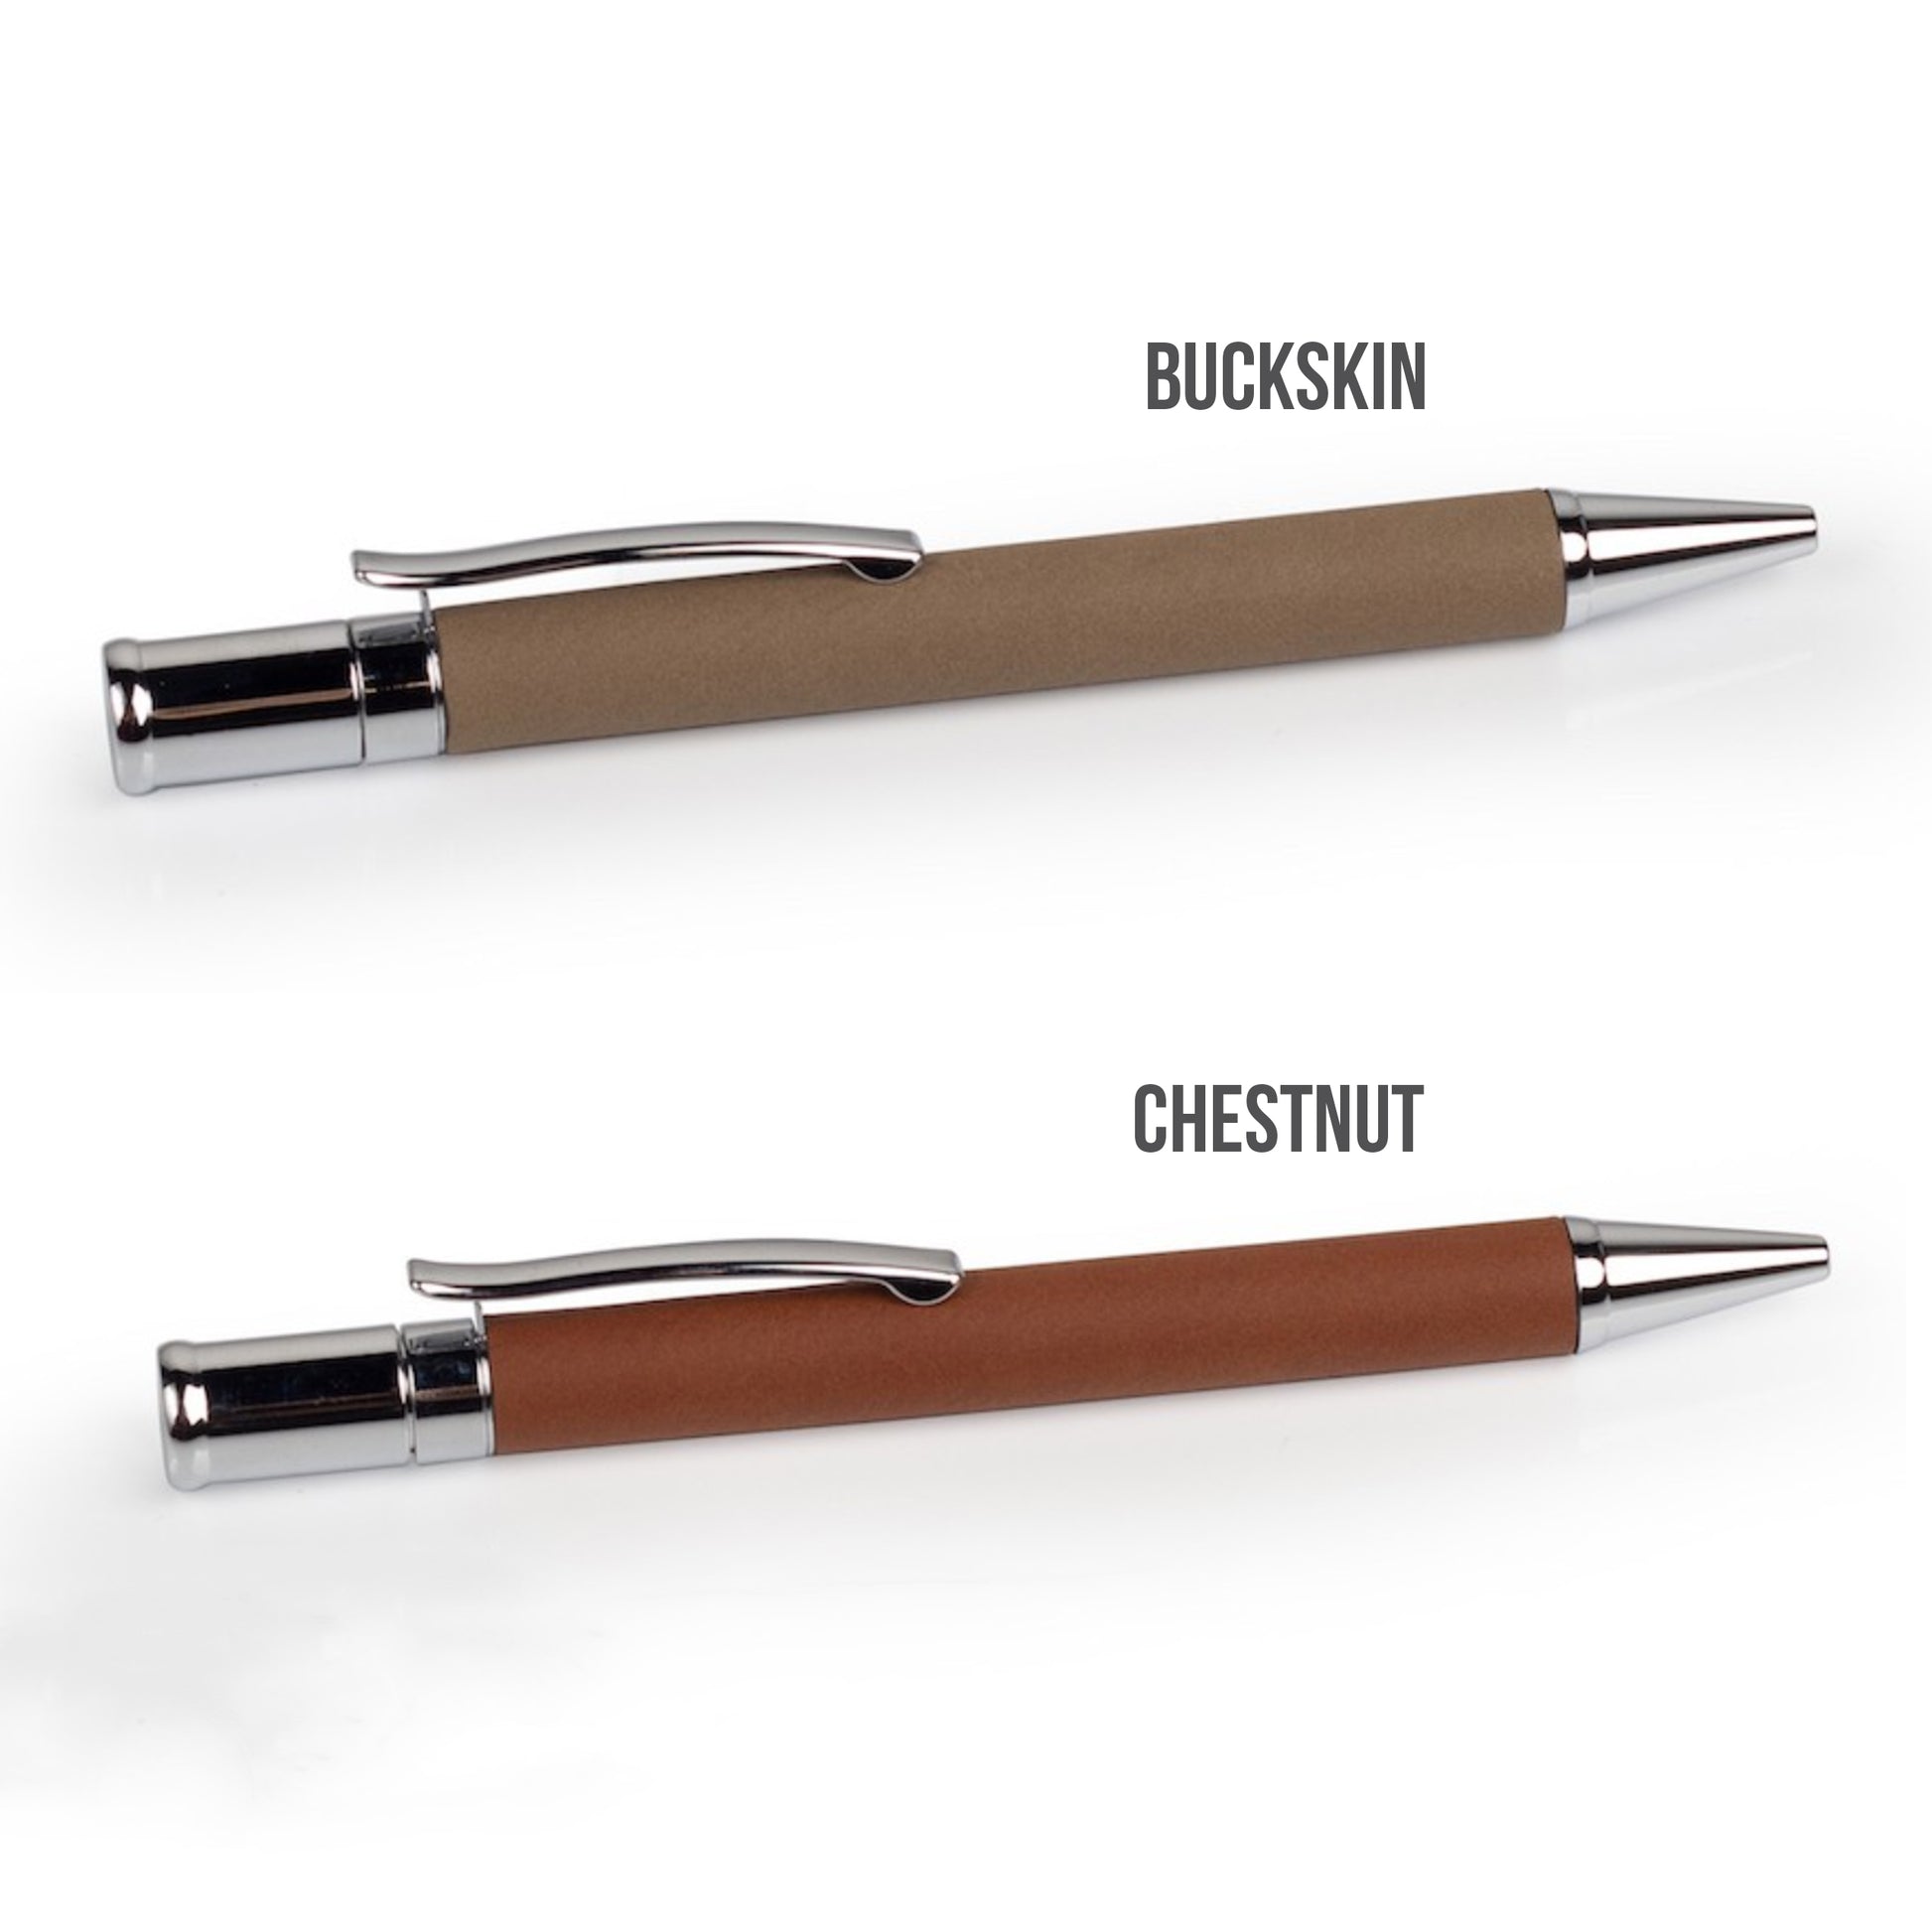 Custom engraved leatherette pen for Graduates, Guys, Grooms, Father's Day gift